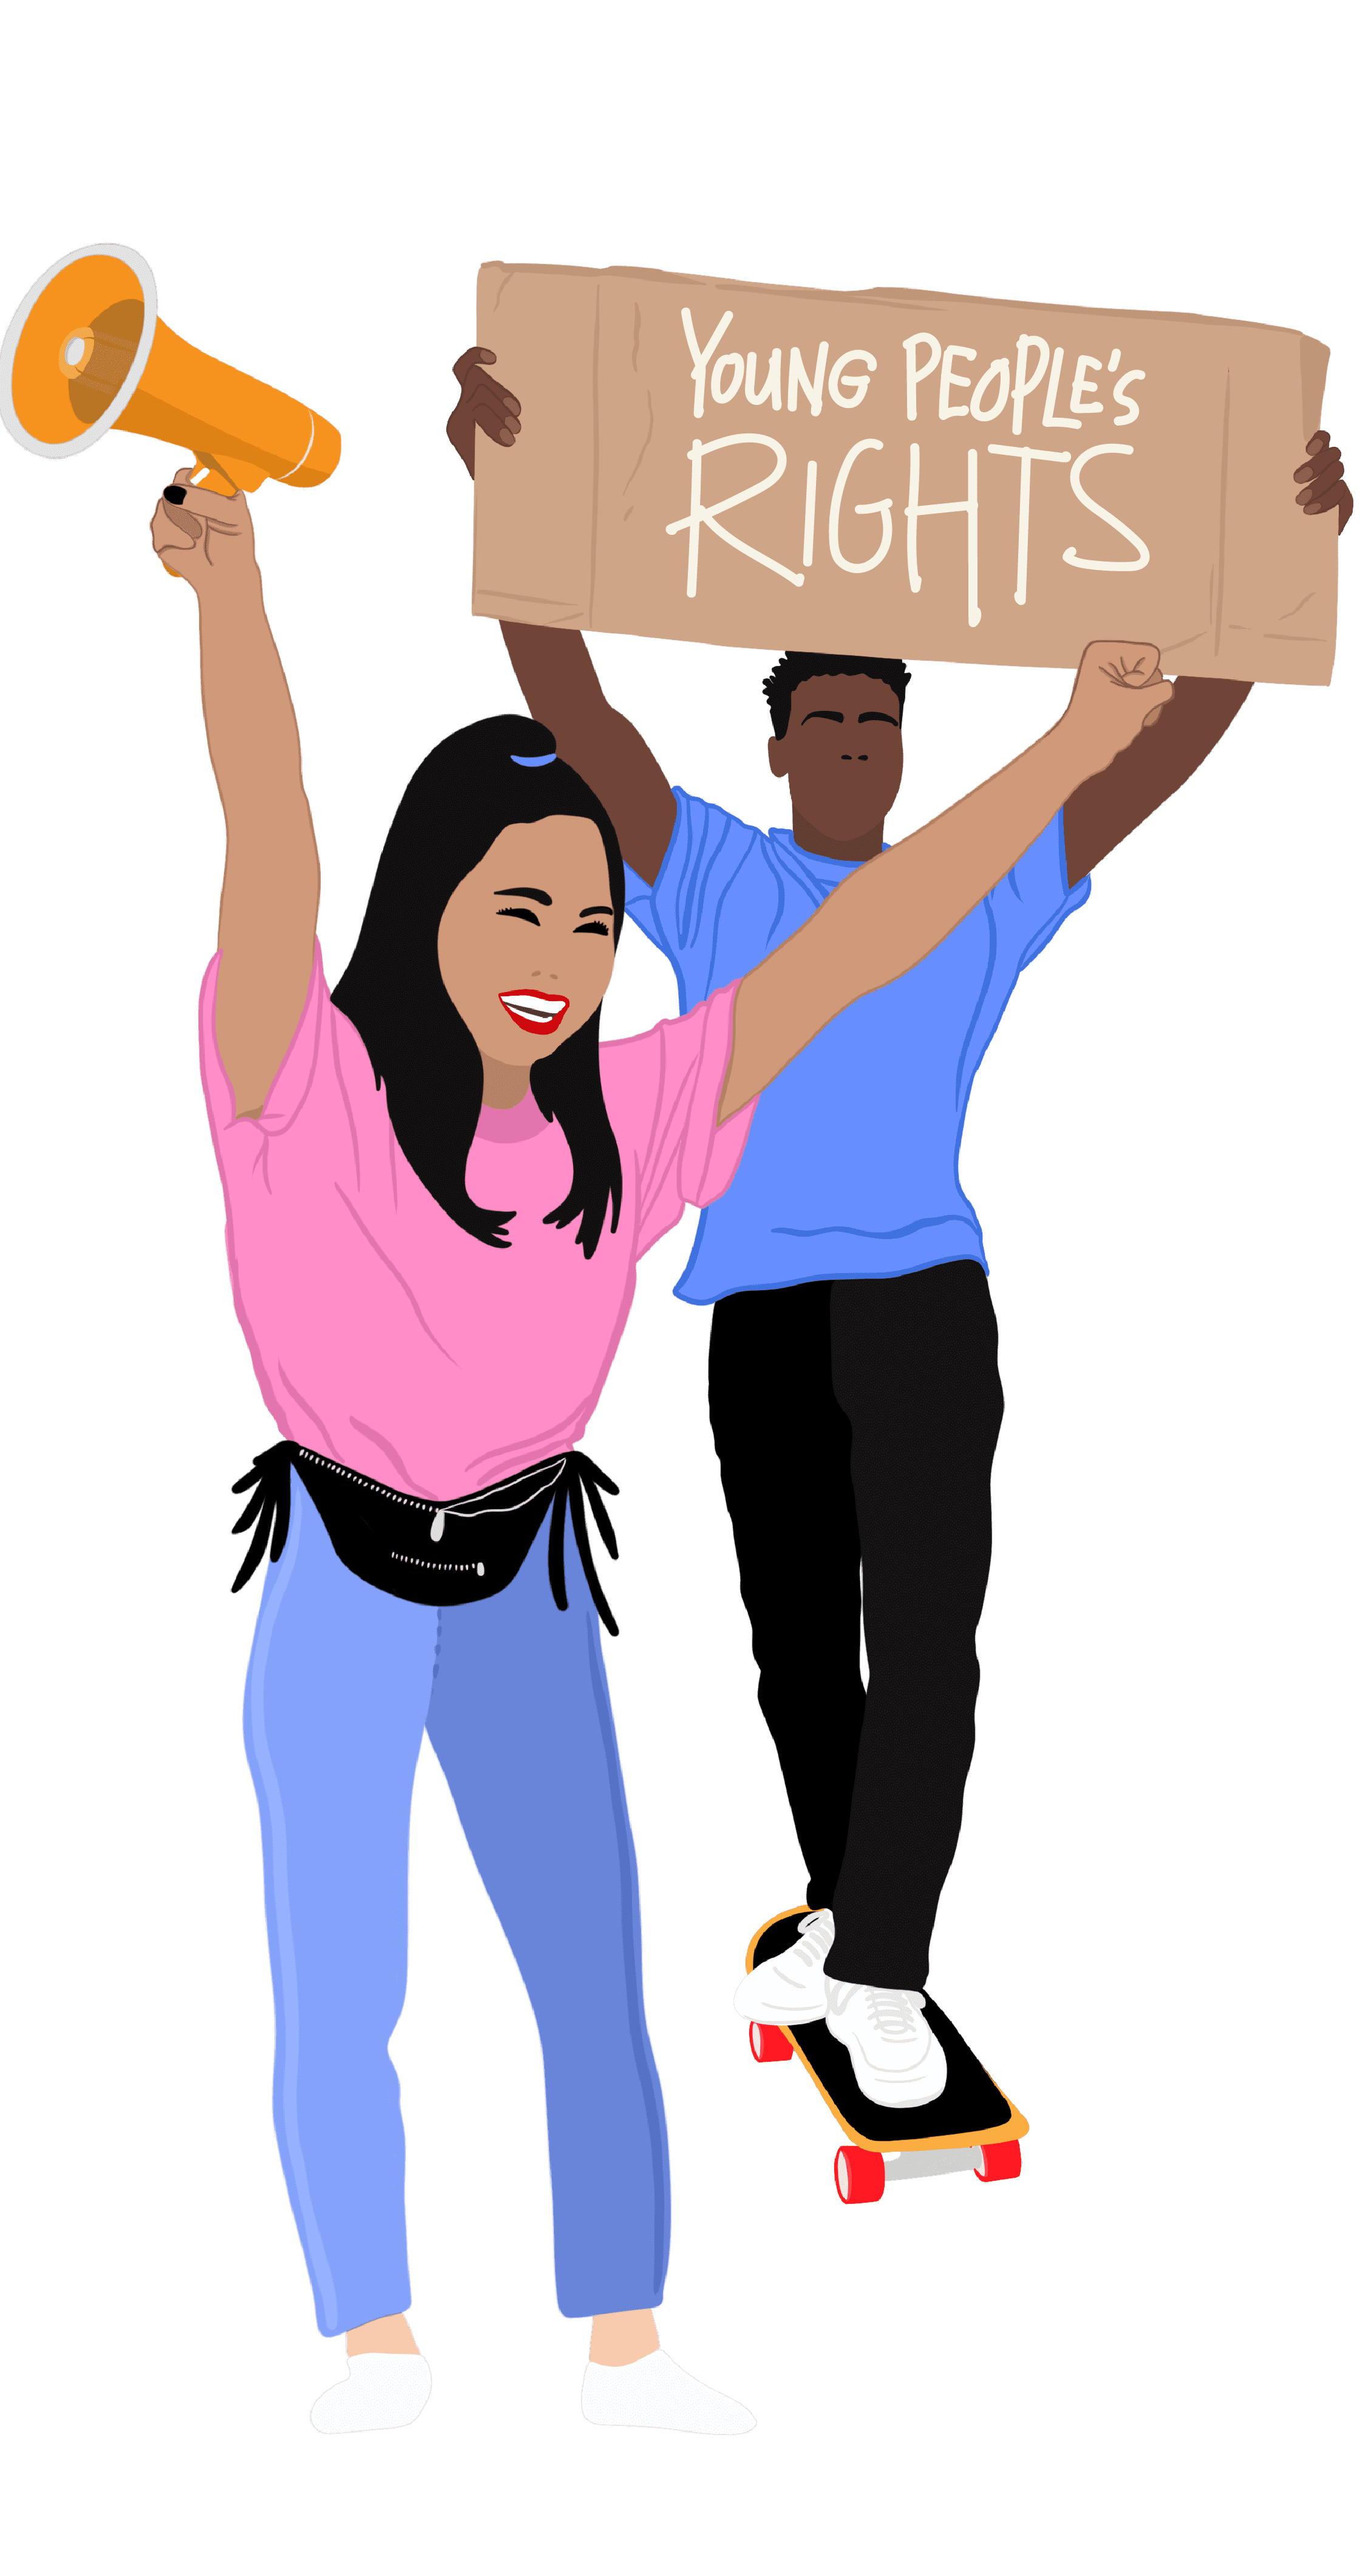 Illustration of two people cheering while holding a sign that says Young People's Rights